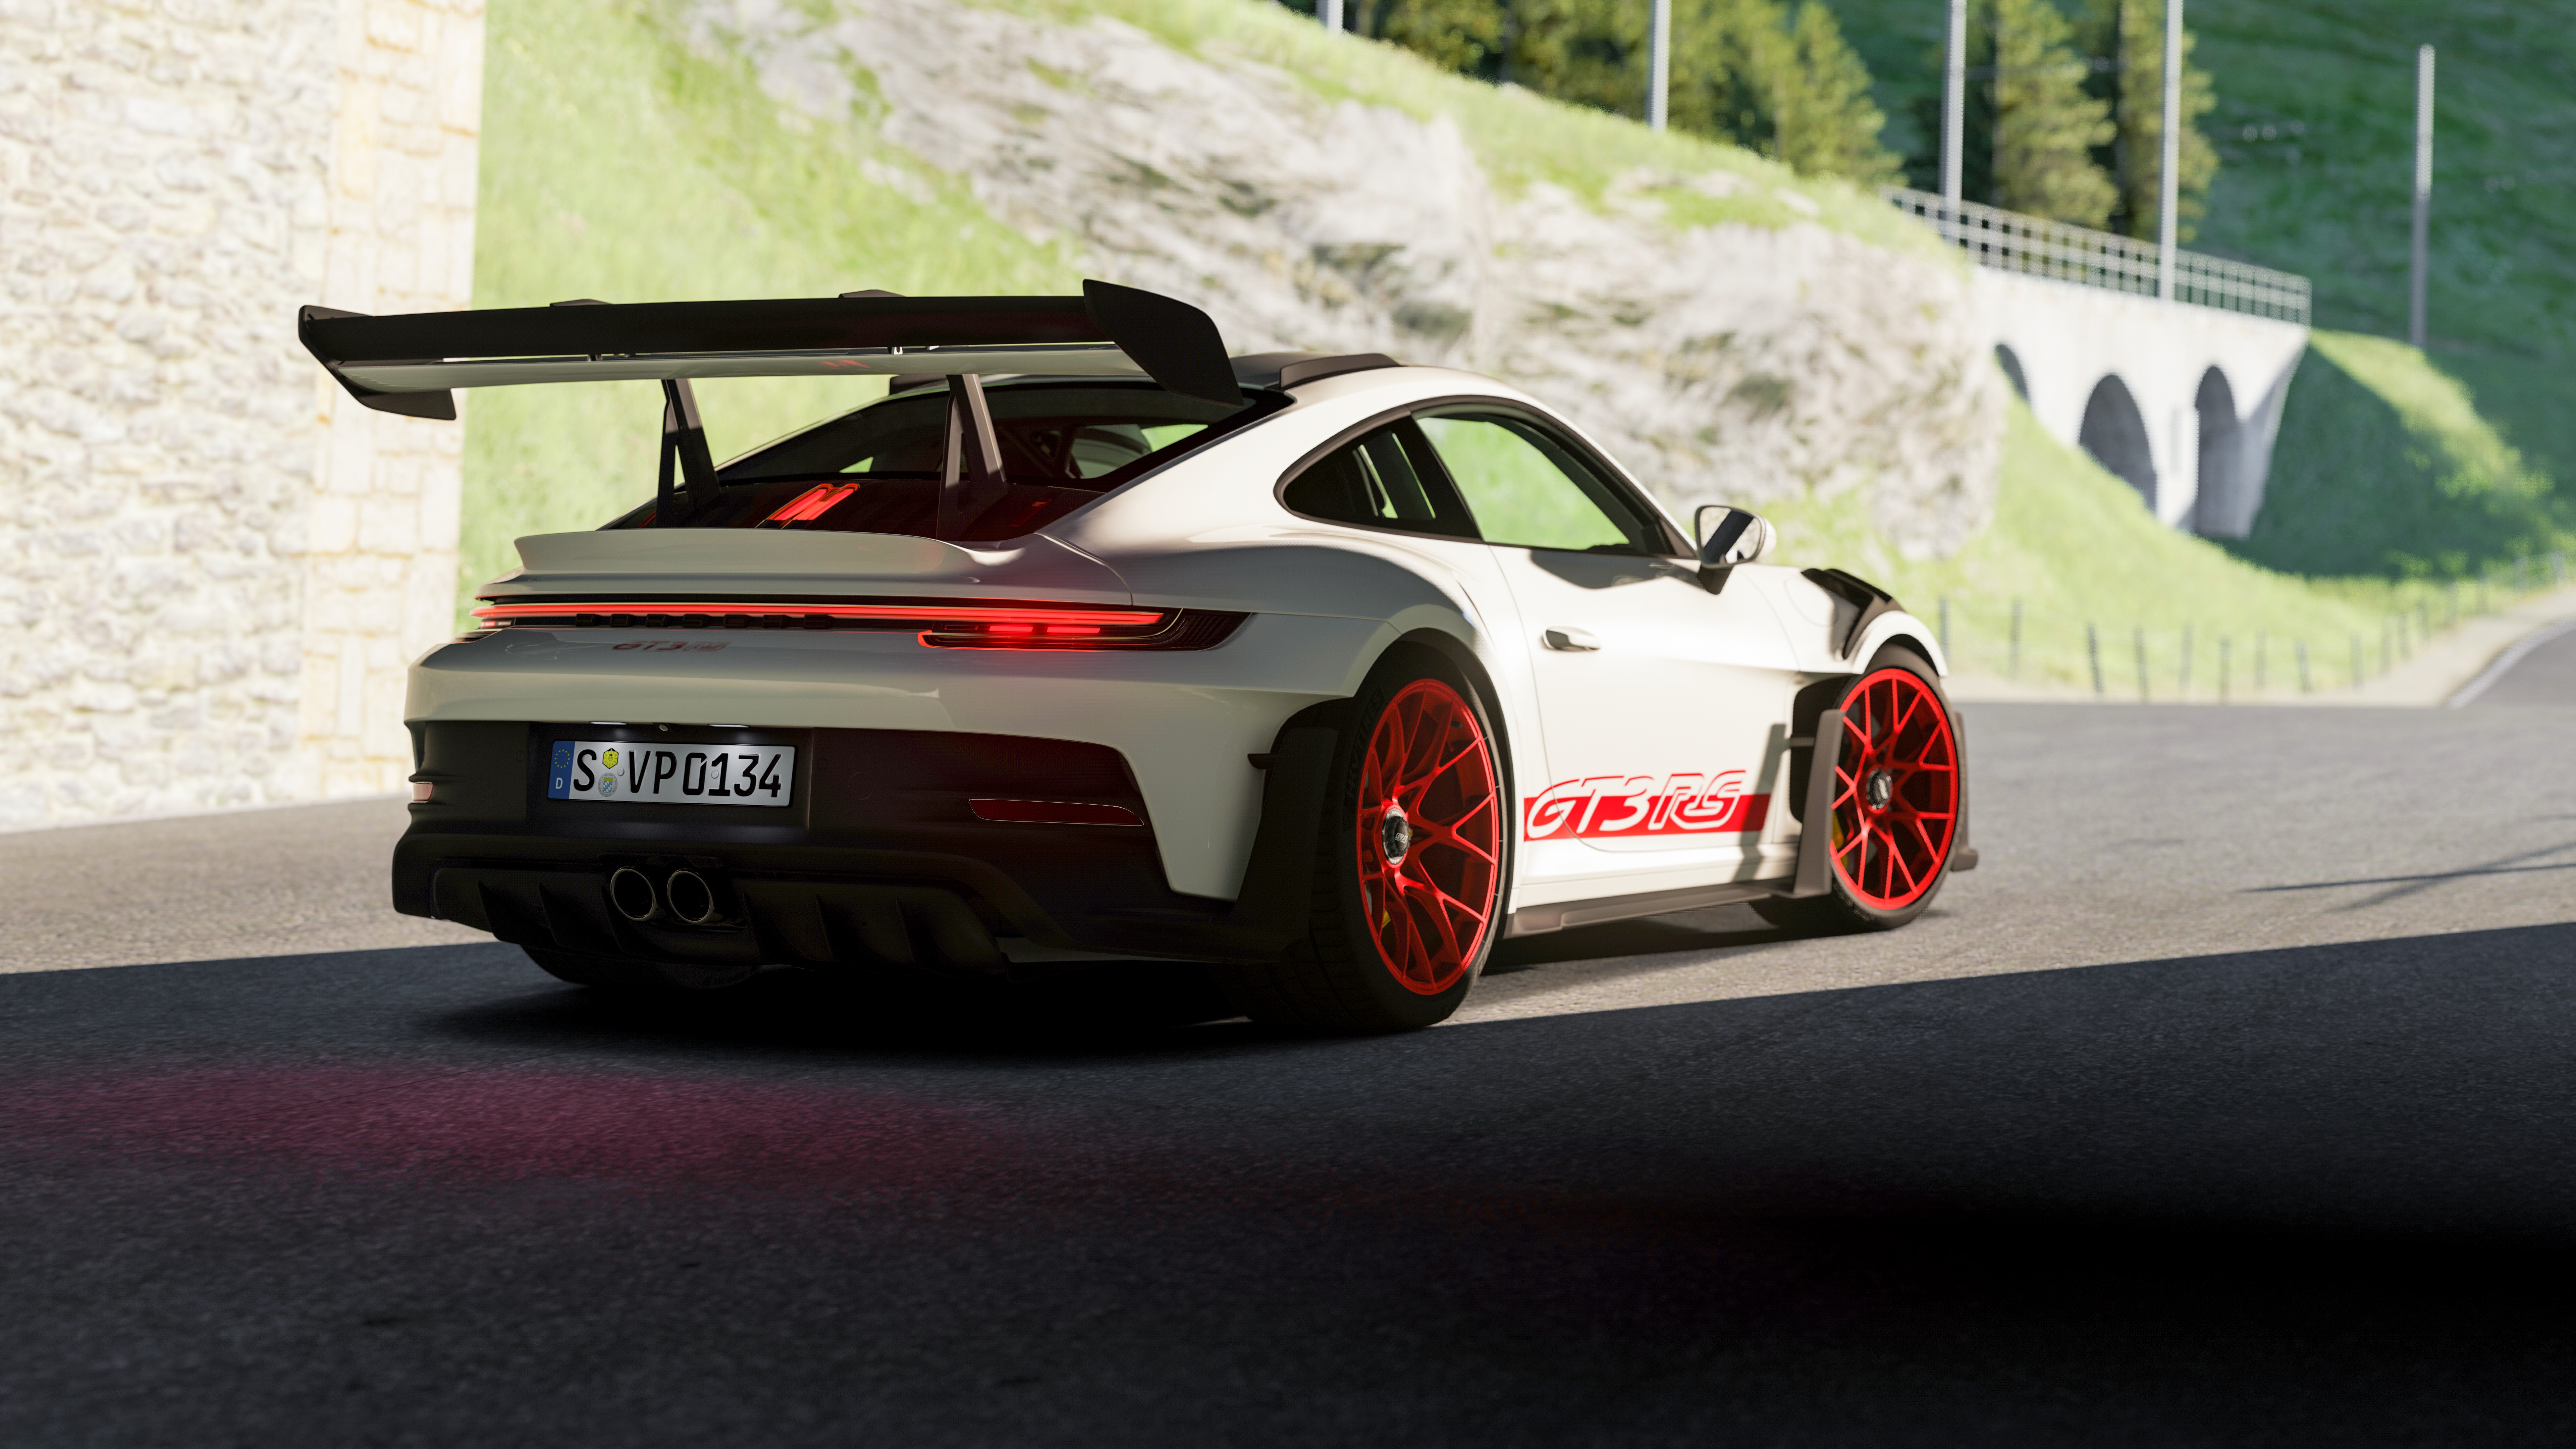 General 7680x4320 Porsche 992 GT3 RS car PC gaming digital art video games rear view licence plates taillights video game art screen shot sunlight road CGI vehicle Assetto Corsa depth of field